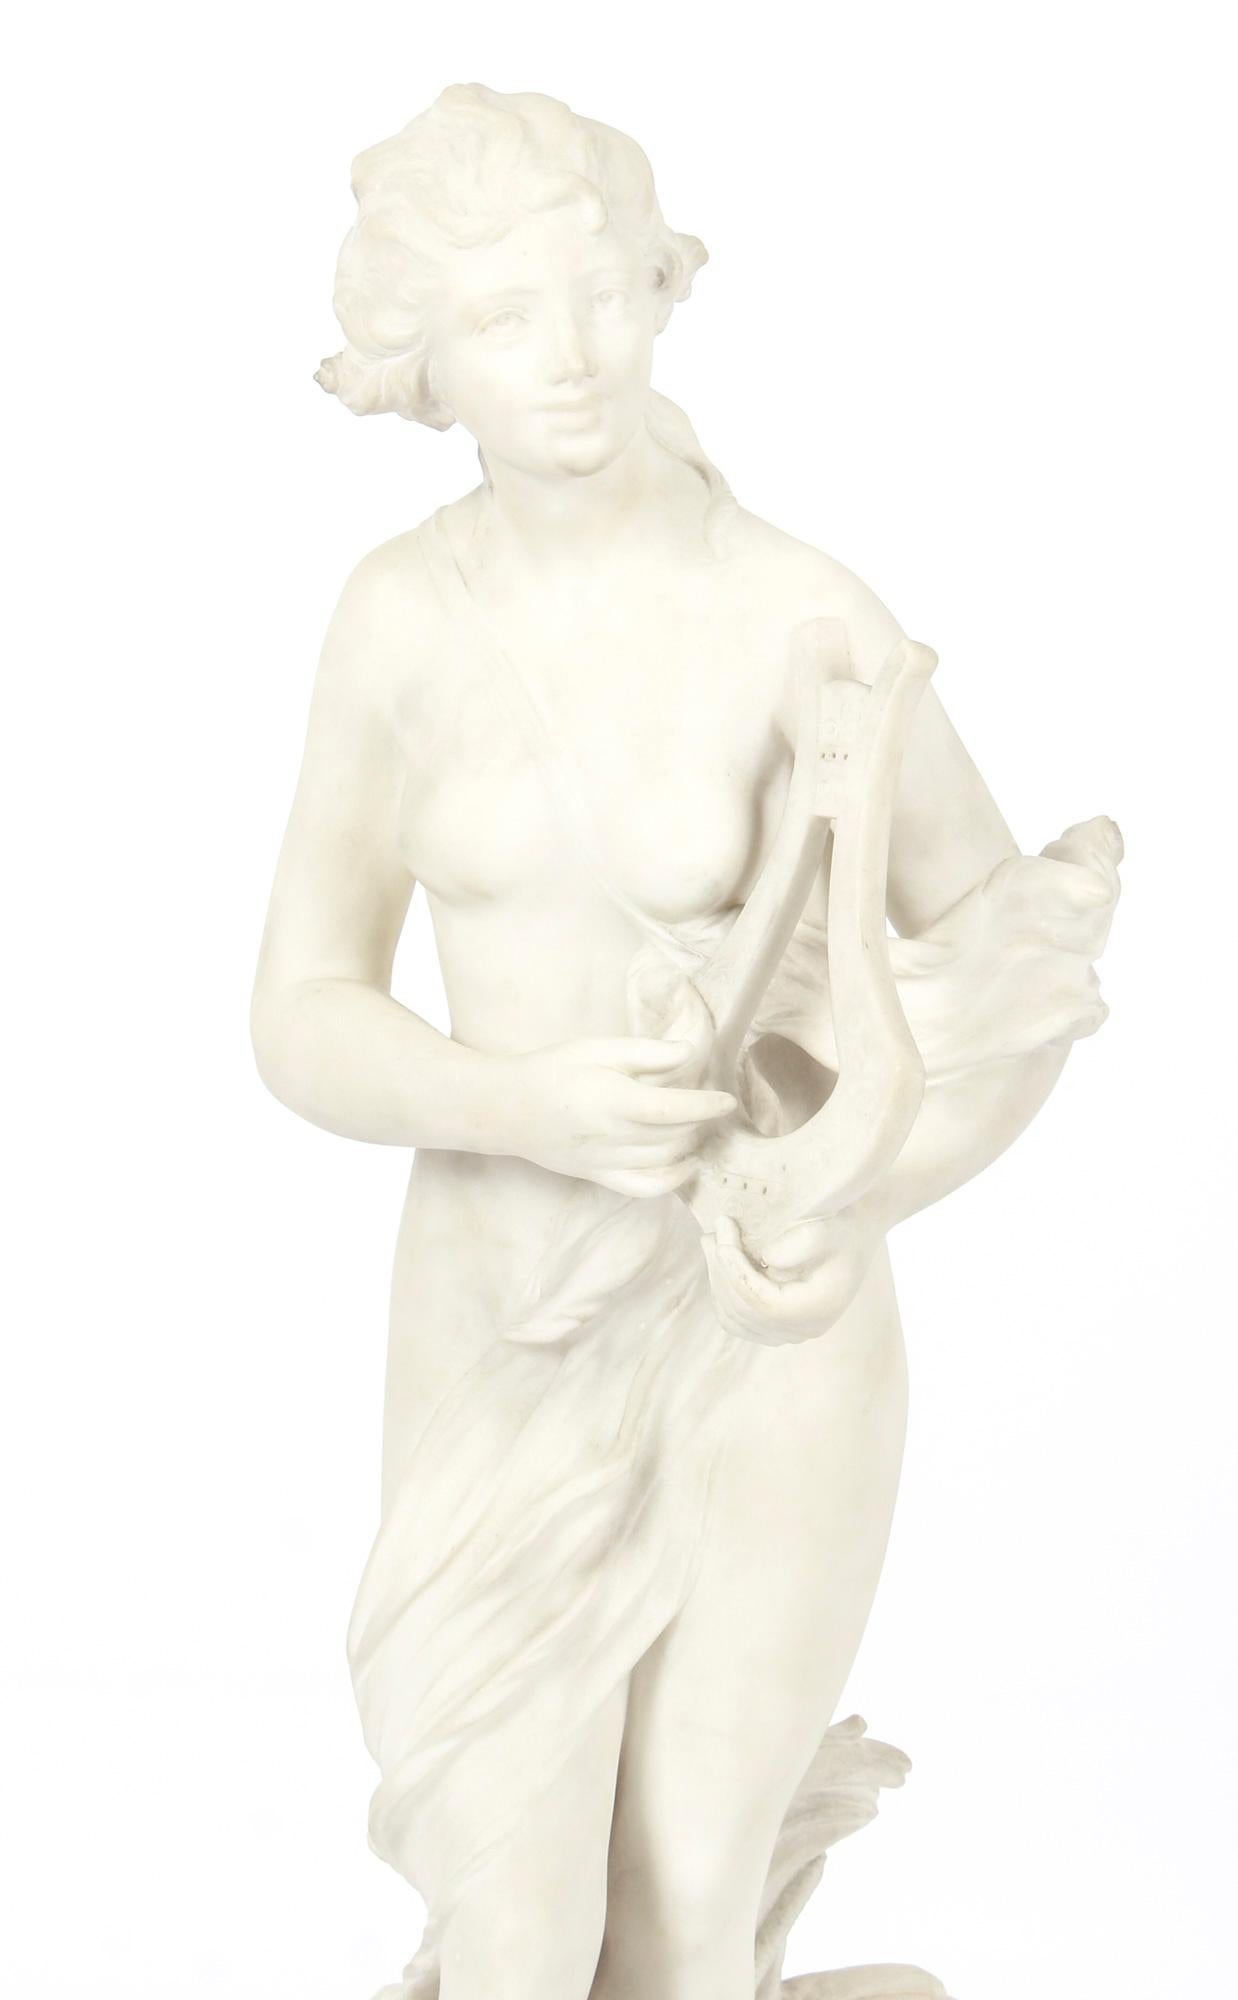 This beautiful Italian white Carrara marble sculpture of Terpsichore bears the signature of the sculptor, T.Dini and dates from the late 19th century.
 
This sensitively carved sculpture depicts Terpsichore, one of the nine muses and the goddess